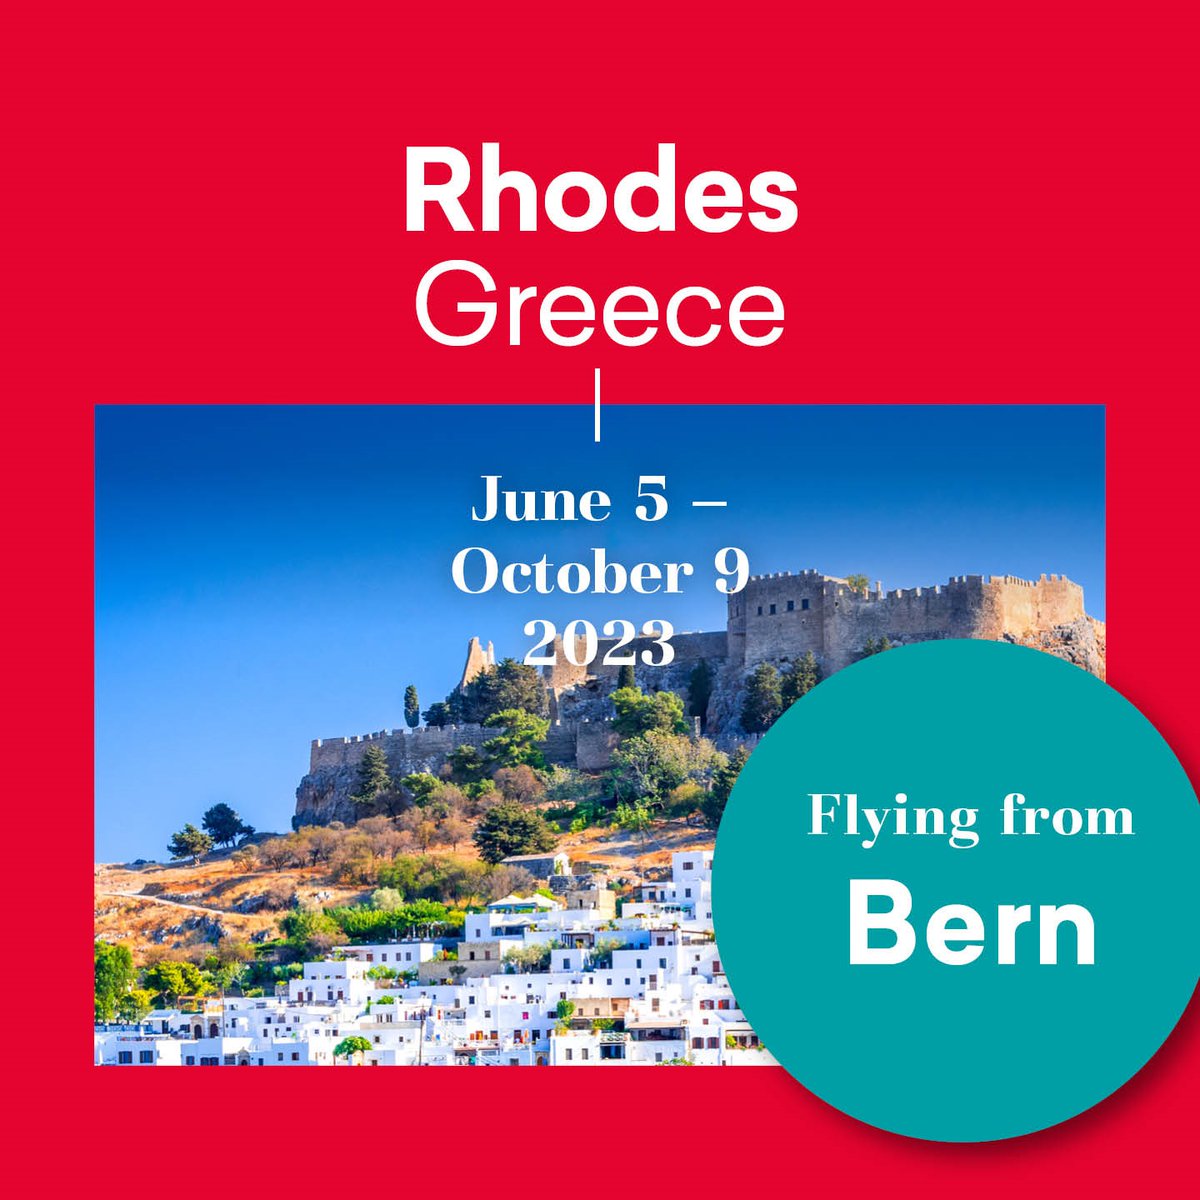 Welcome to the island of sun - Rhodes ☀ Discover a fusion of cosmopolitan vibes and traditional charm on the pearl of the mediterranean. Rhodes is as an idyllic summer destination for every type of traveller. 🏖️🌴 💻 Book your Greek summer on helvetic.com